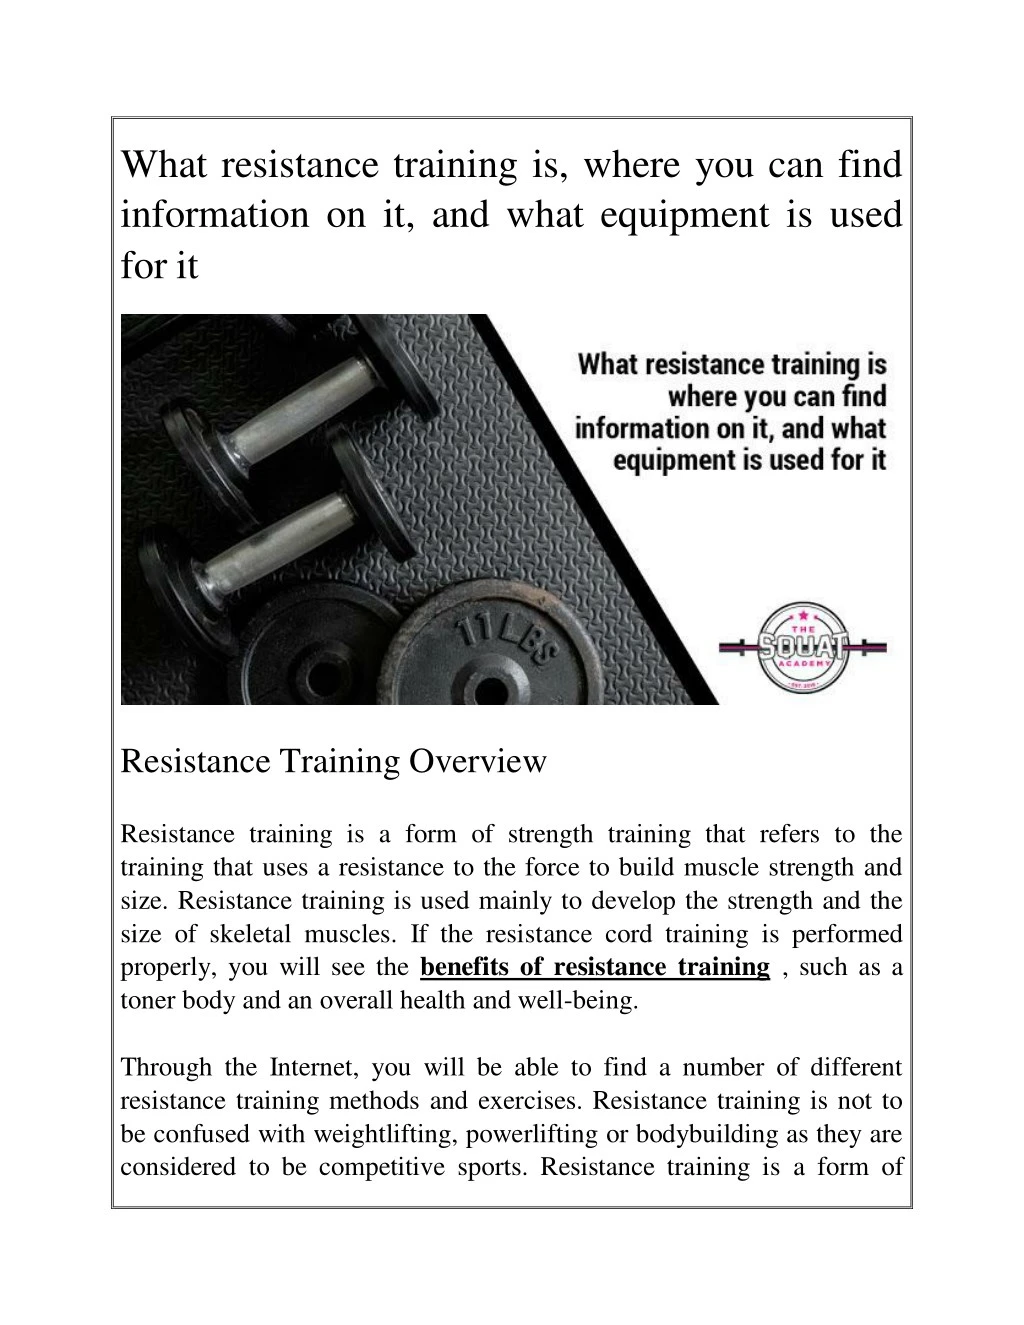 what resistance training is where you can find